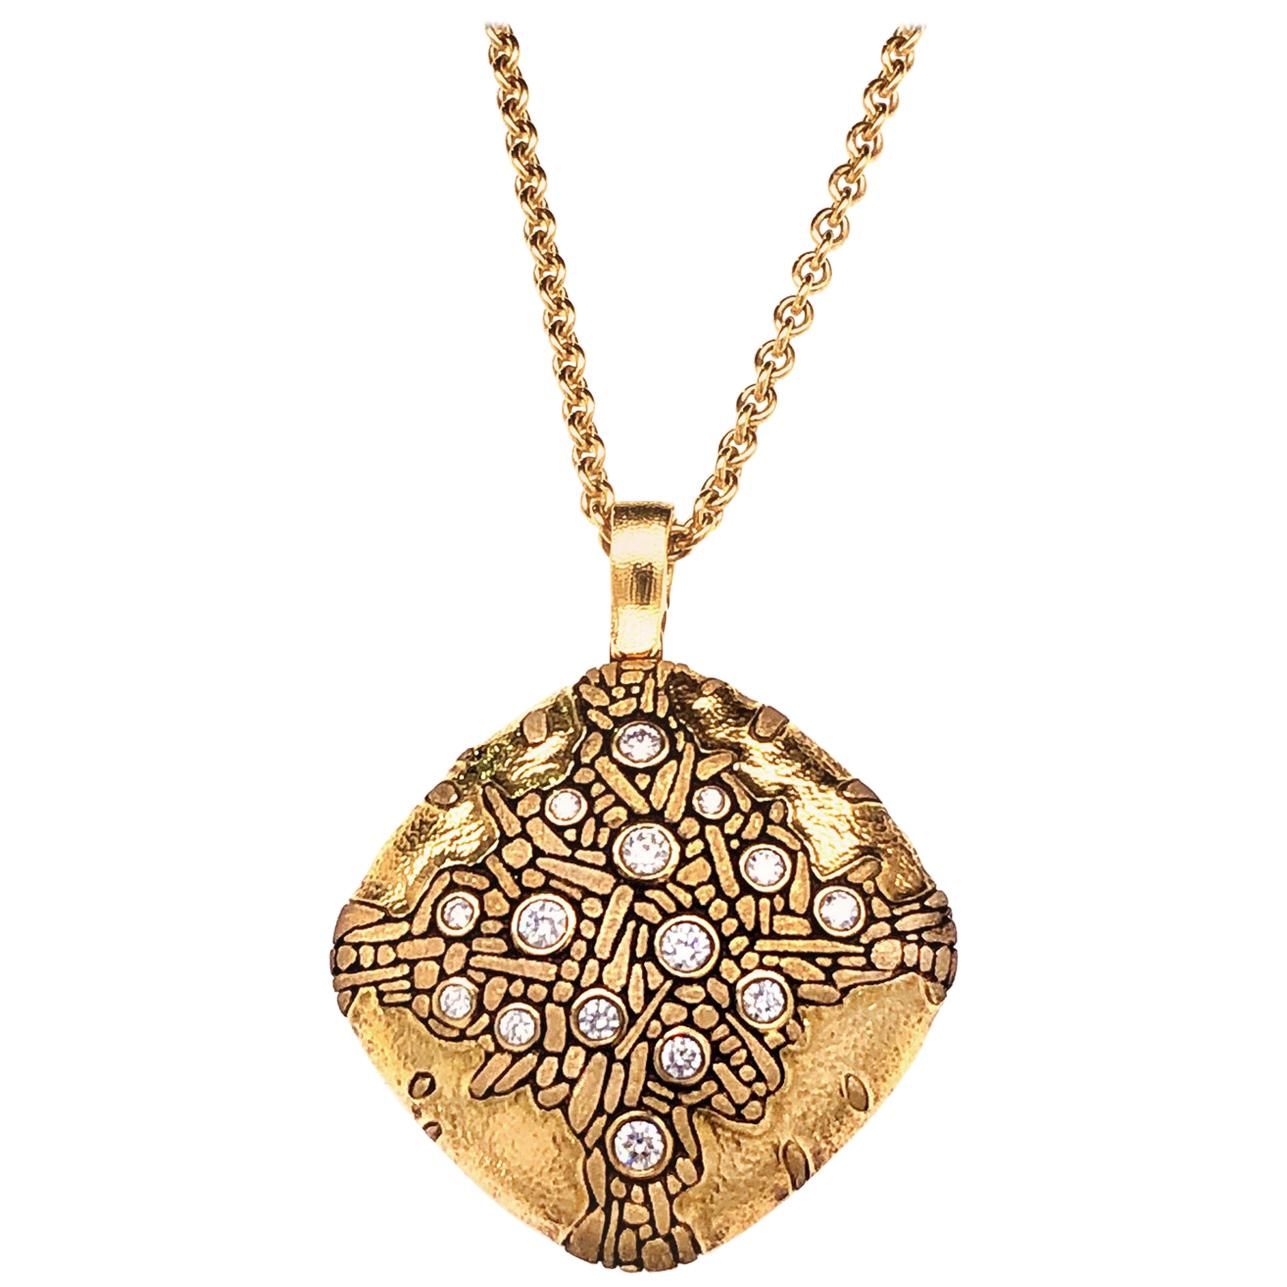 Alex Sepkus "Cushion" Pendant Necklace with White Diamonds in Gold